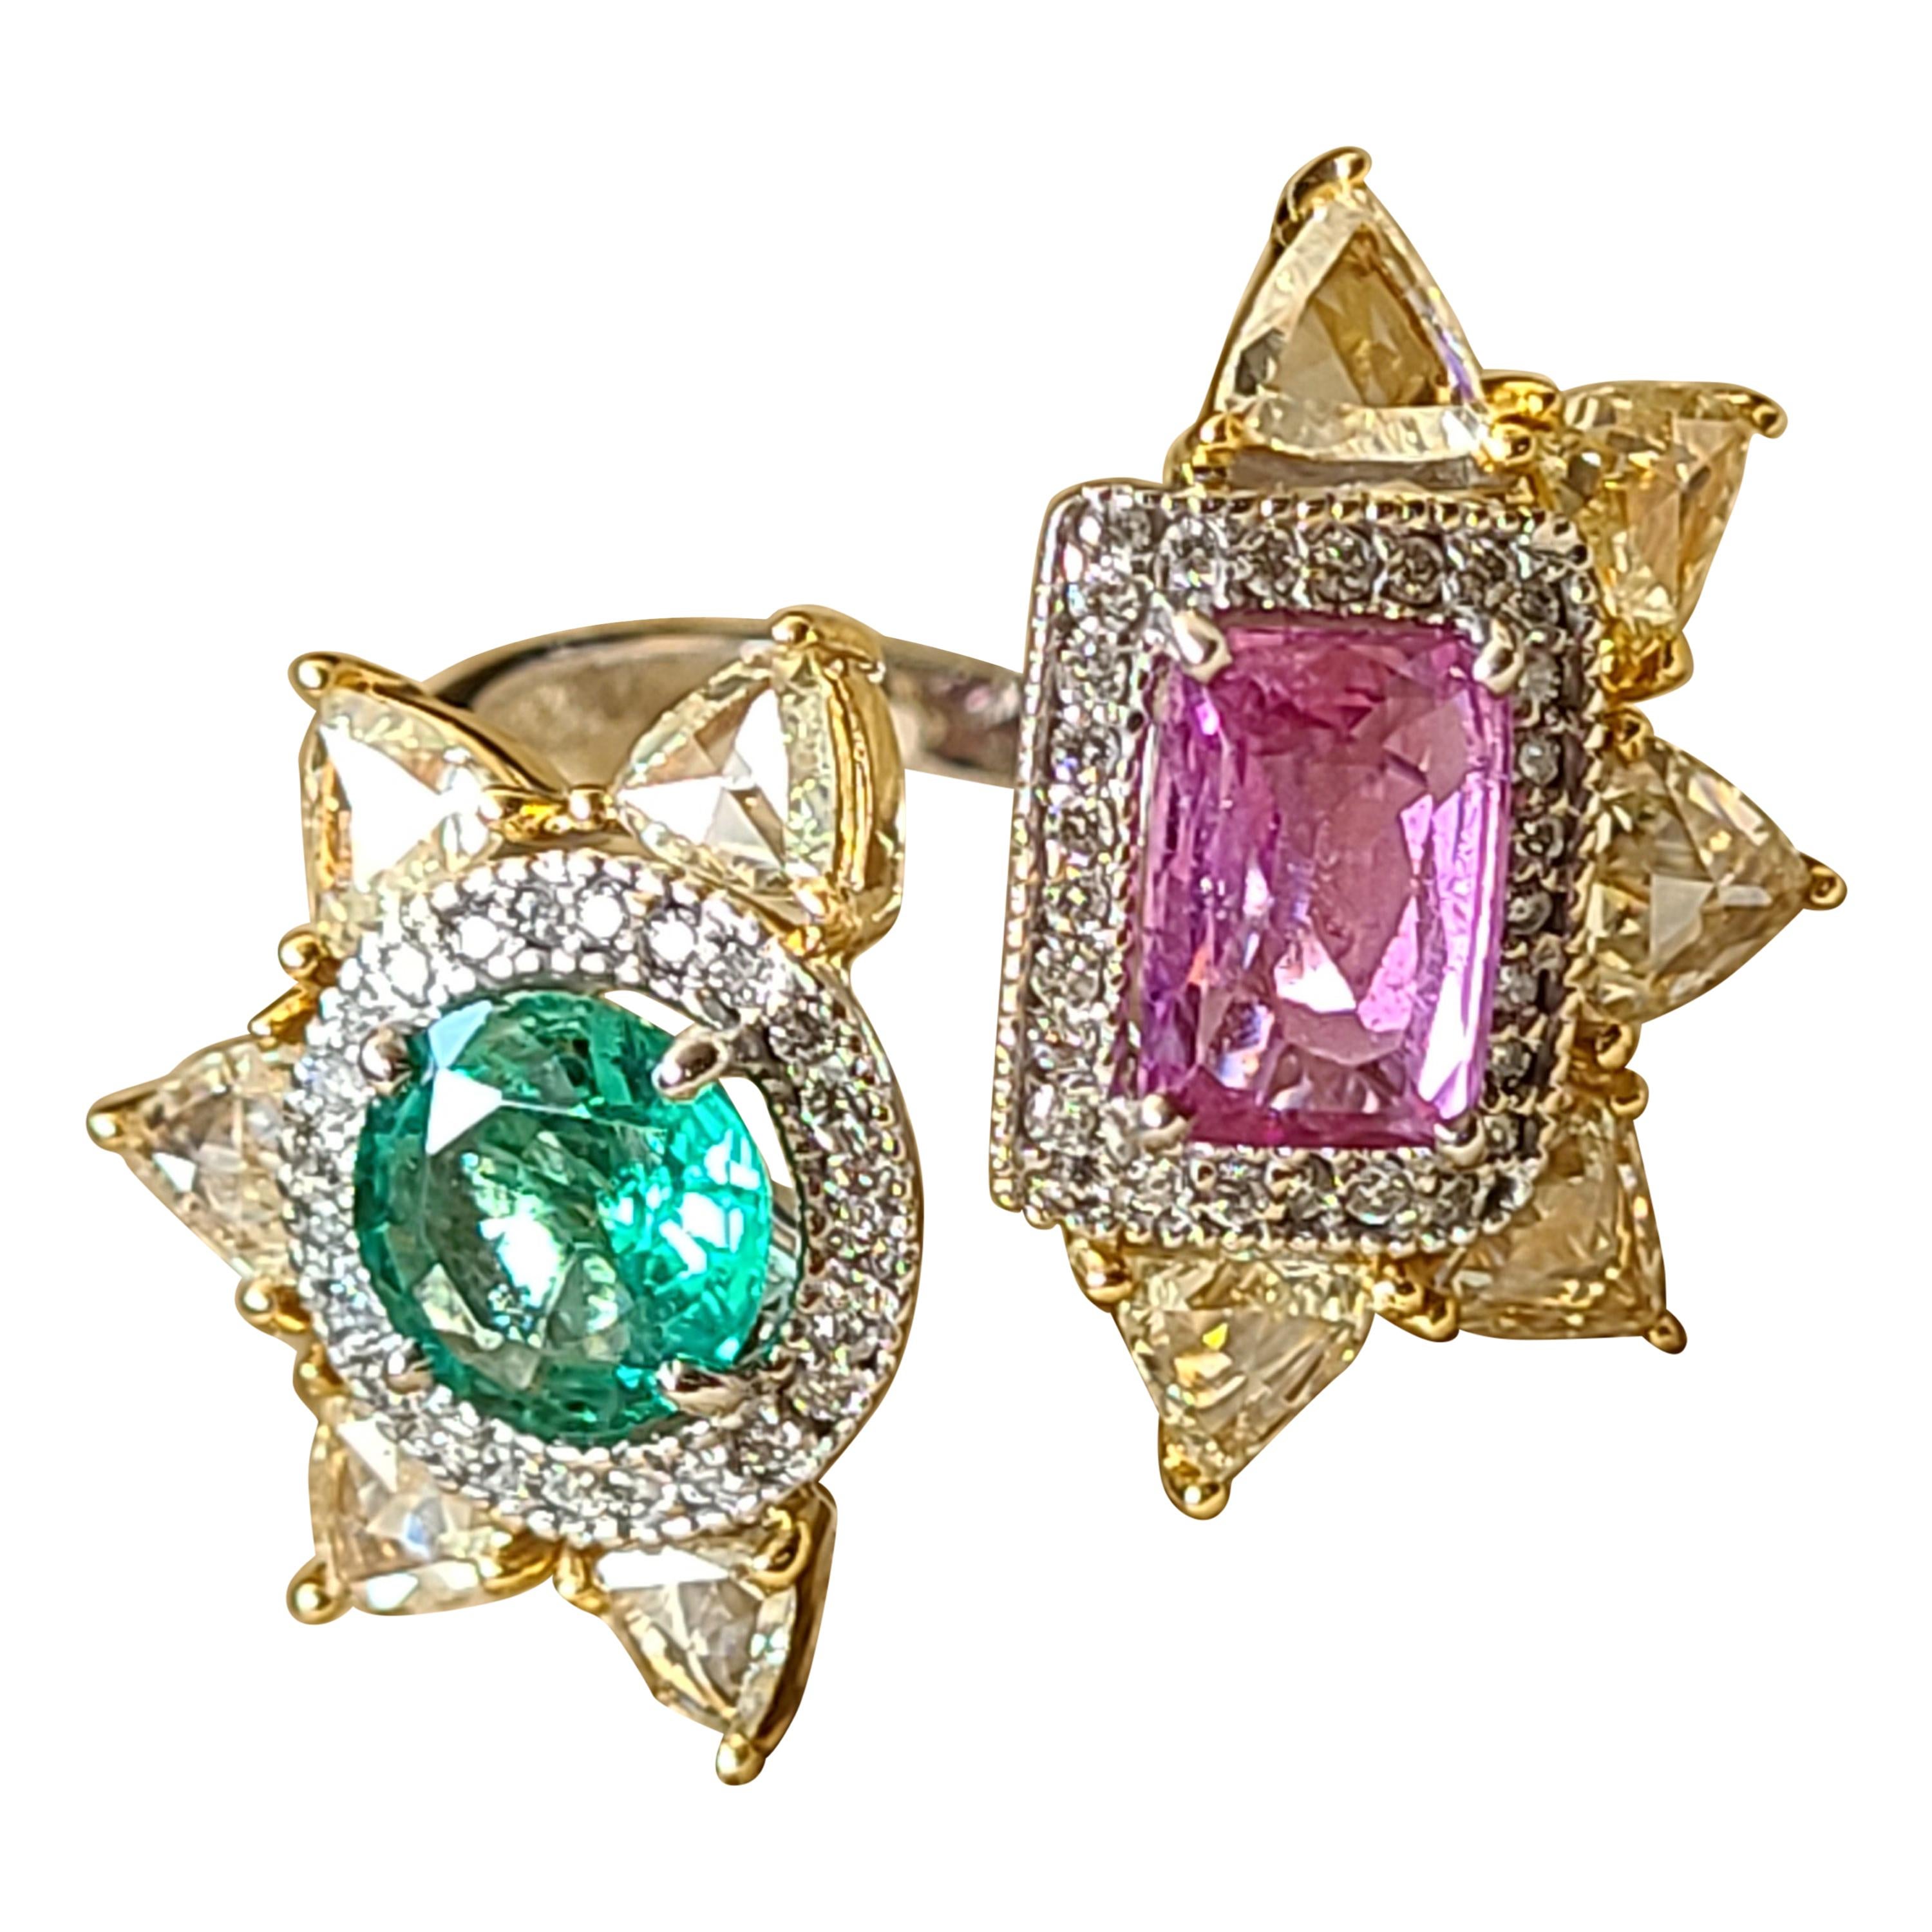 Natural Emerald and Pink Sapphire Ring Set in 18 Karat Gold with Rosecut Diamond